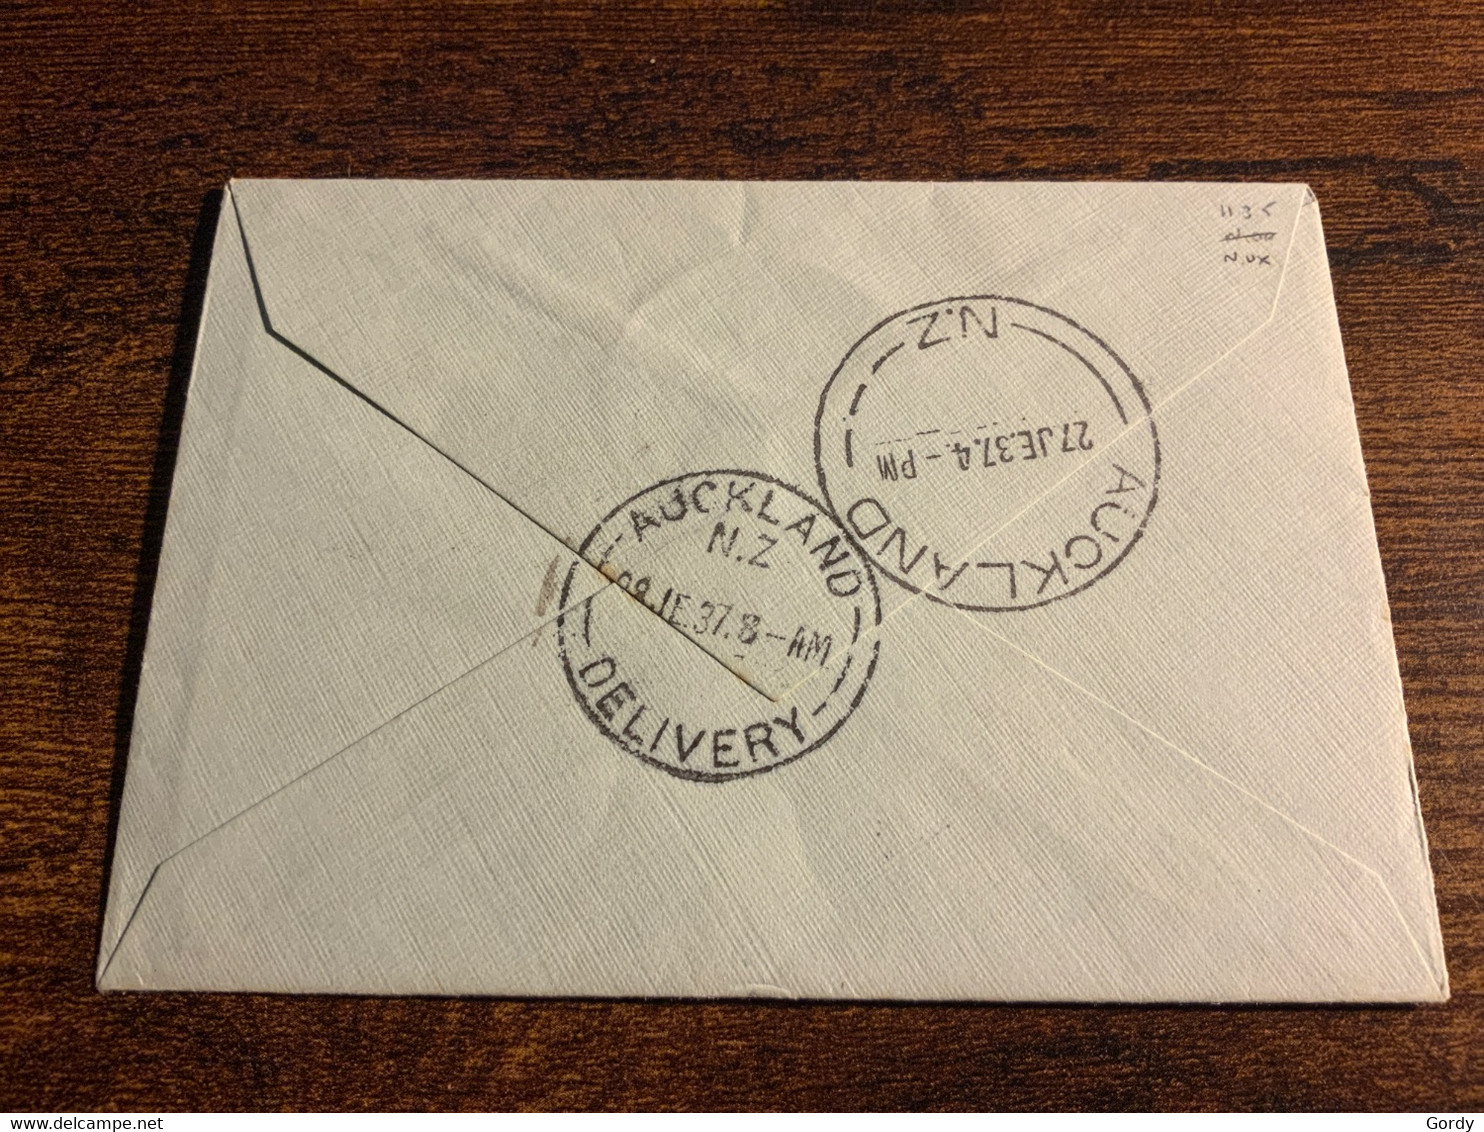 1937 New Zealand Air Mail Cover (C69) - Luchtpost